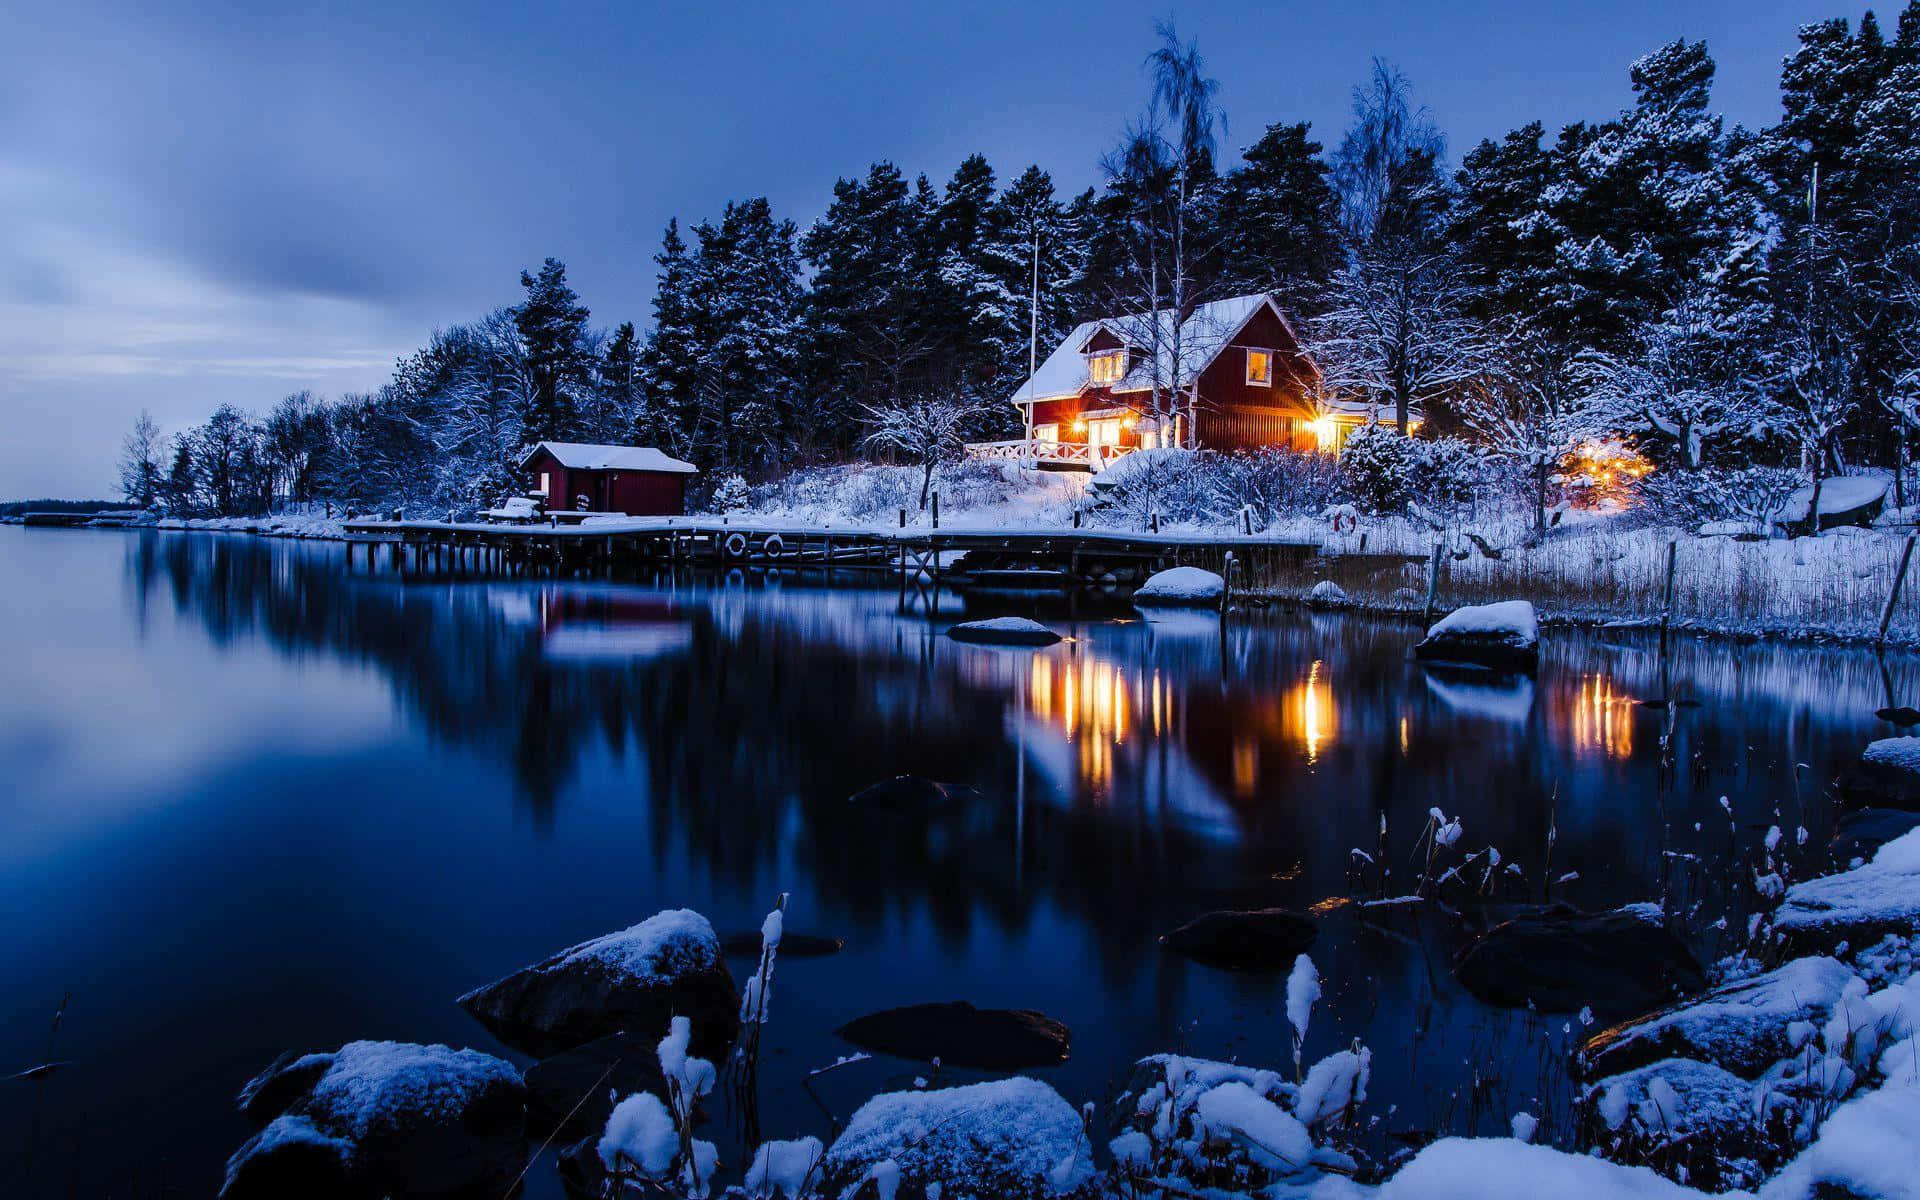 Feel the tranquility of a beautiful night during the winter season Wallpaper